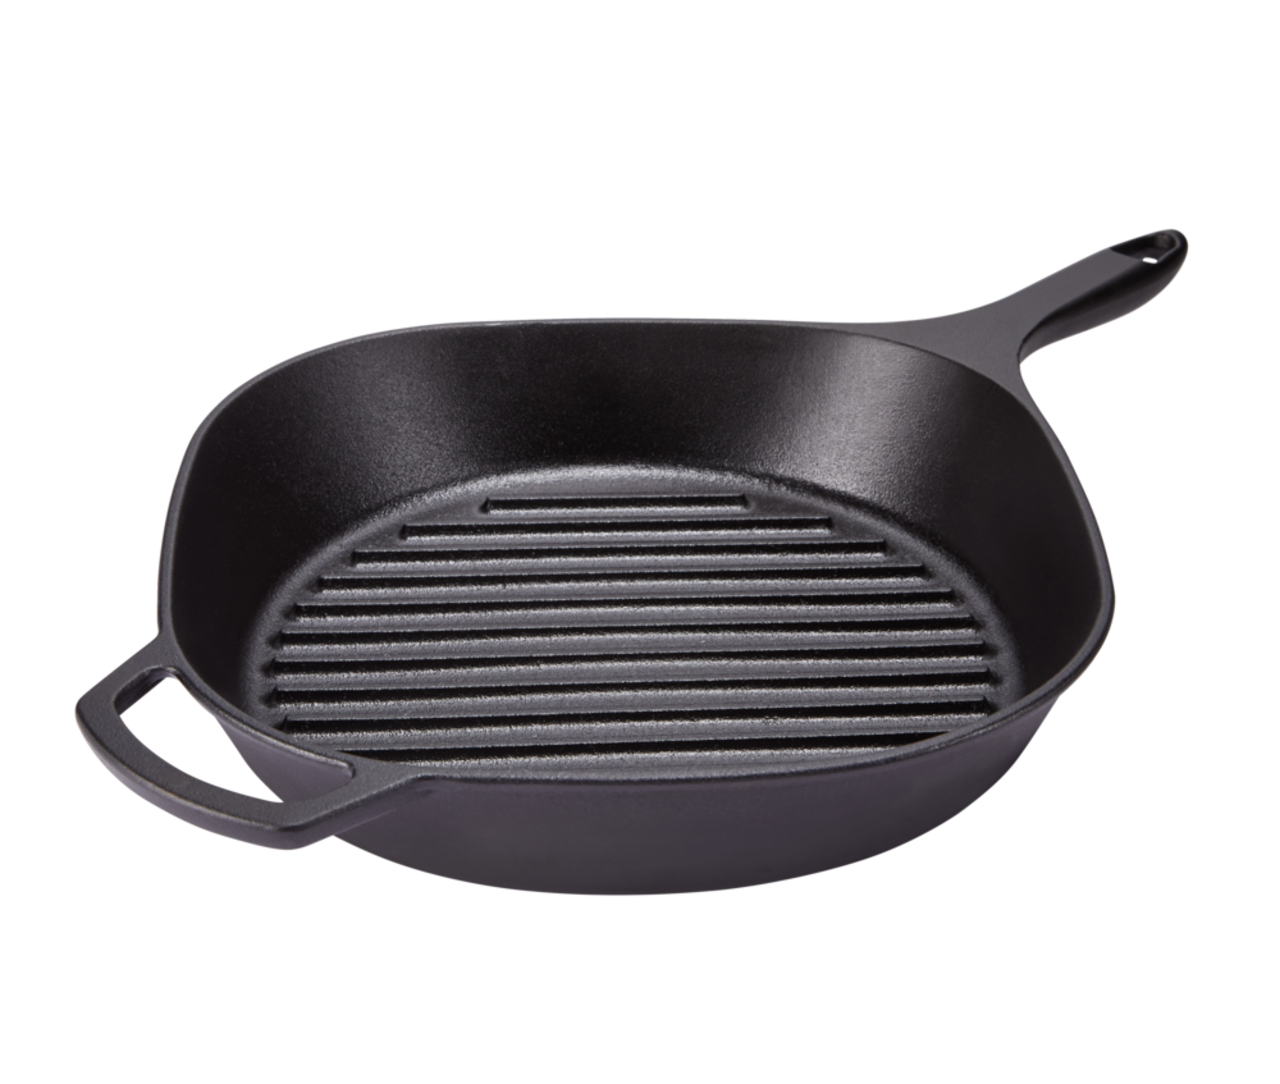 https://media-www.canadiantire.ca/product/living/kitchen/cookware/1429870/paderno-signature-12-pre-seasoned-cast-iron-grill-pan-fe68d07e-6023-405a-8b55-f6c5149a4e13.png?imdensity=1&imwidth=1244&impolicy=mZoom